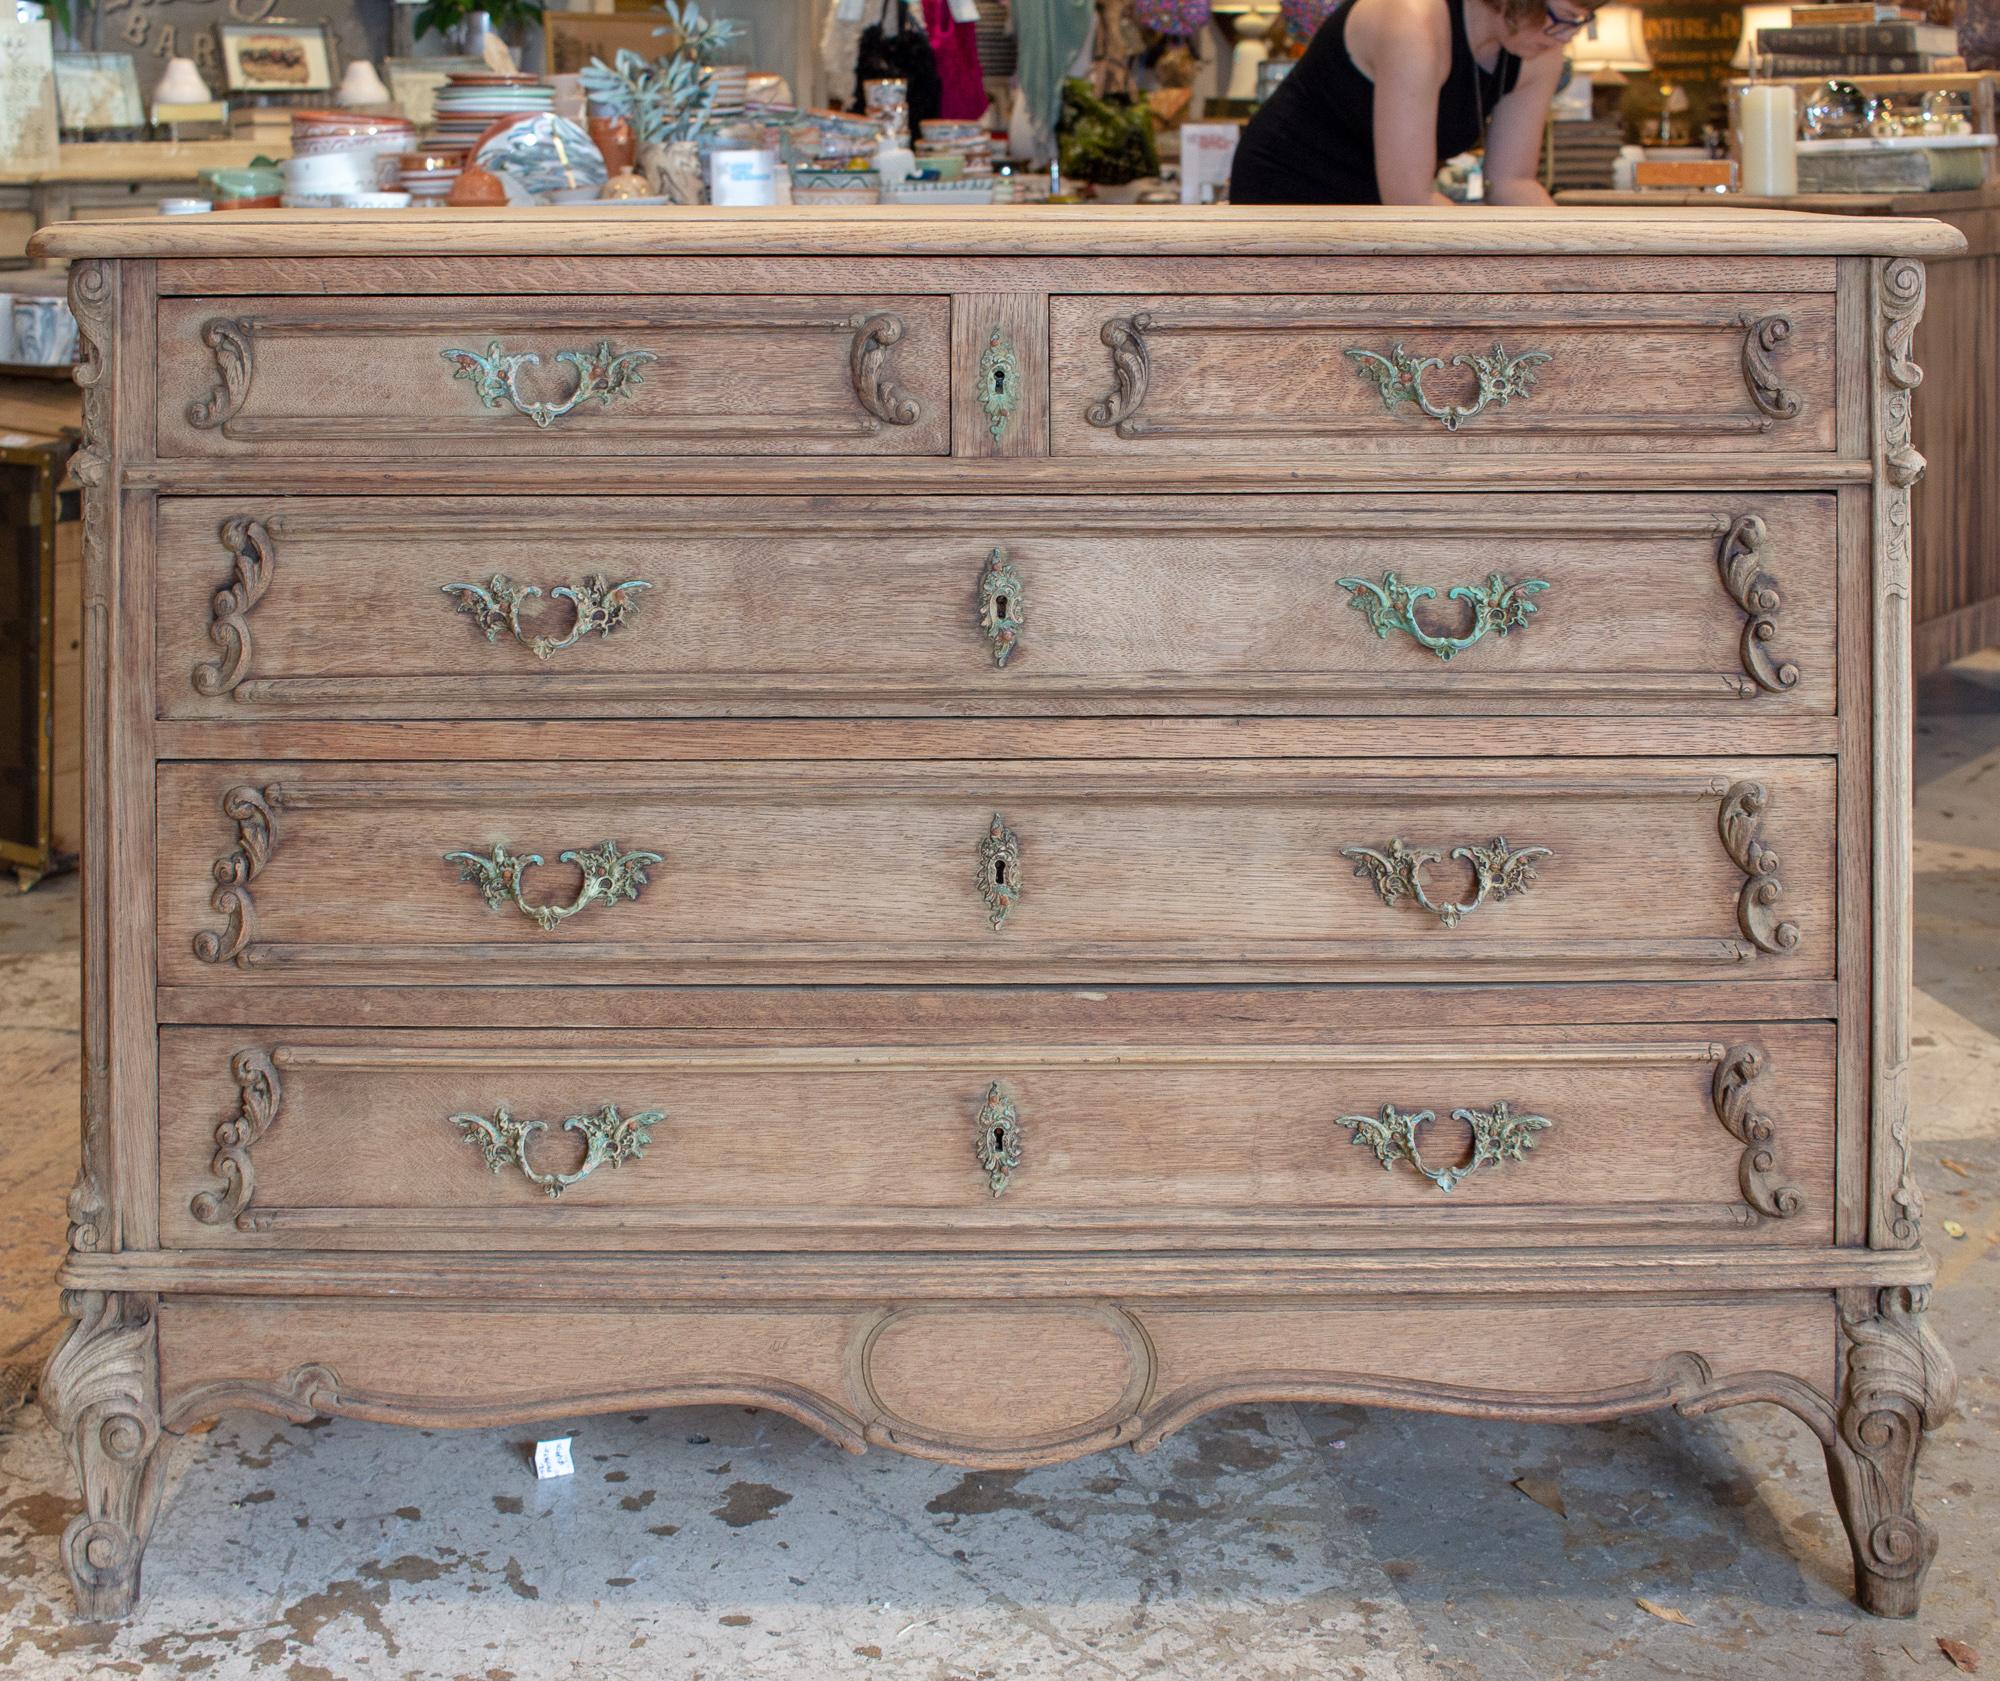 This antique commode was sourced in France and features five drawers and beautifully detailed carvings accented by wonderfully patinated hardware. The drawer fronts feature fantastic scroll work along with metal handles and escutcheons that have